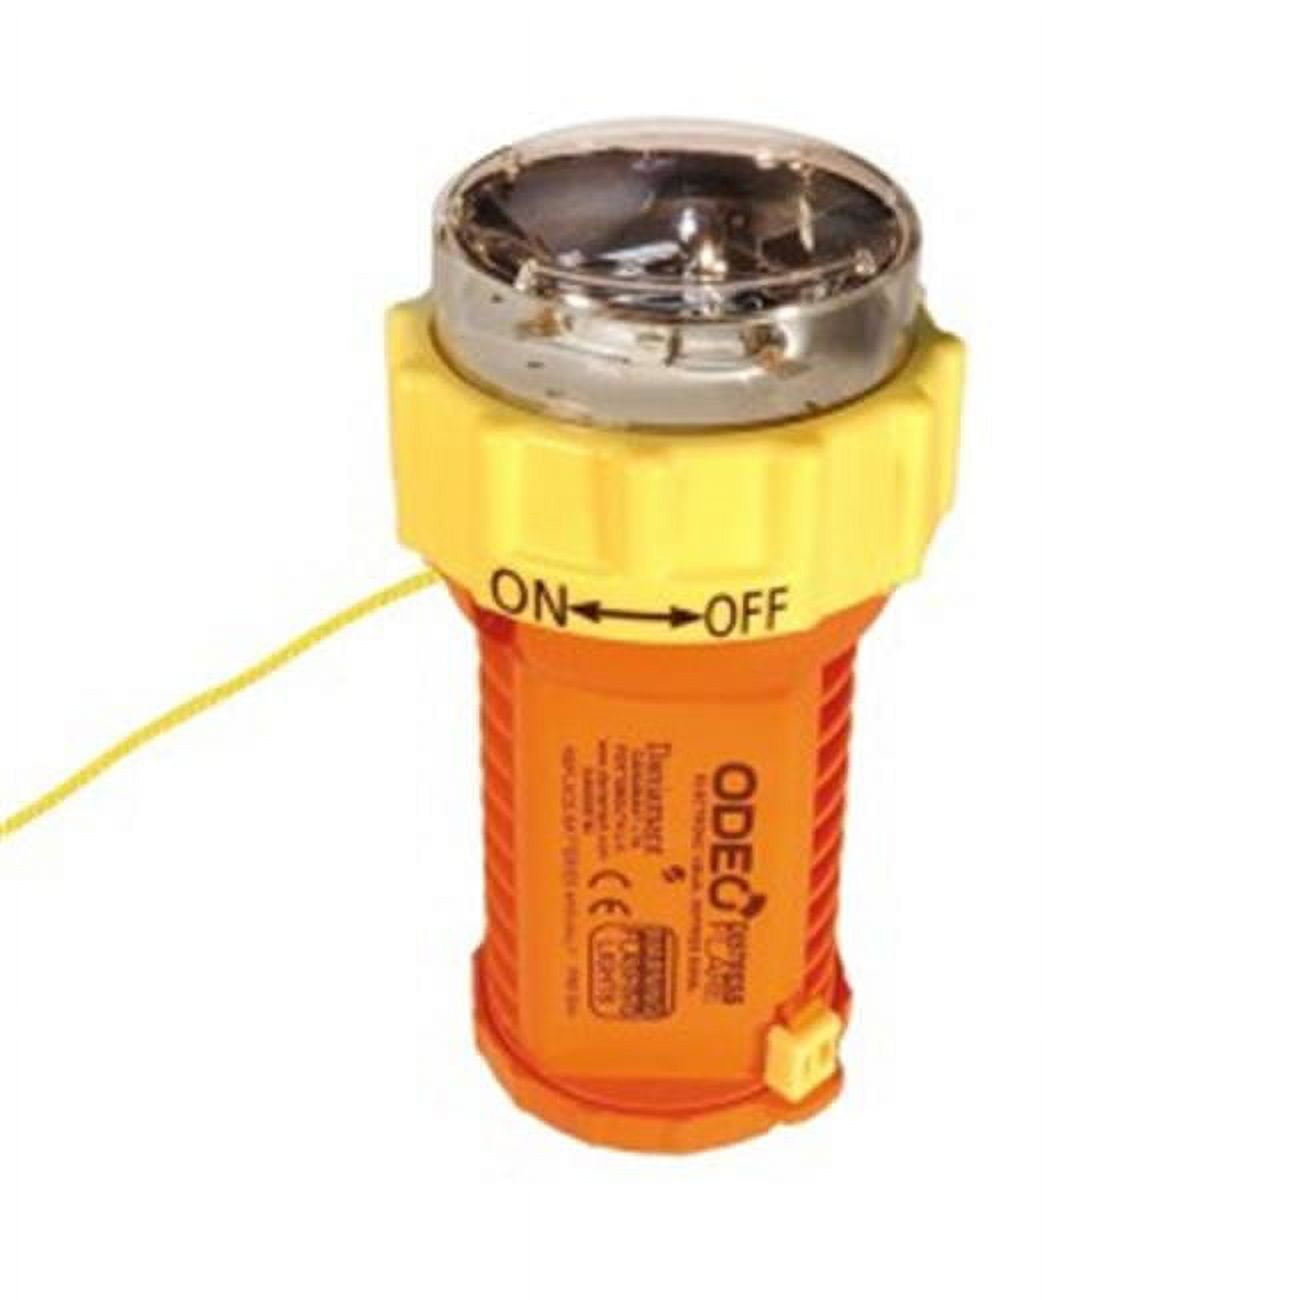 Picture of Daniamant DA30-005AE Odeo LED Distress Flare with Battery